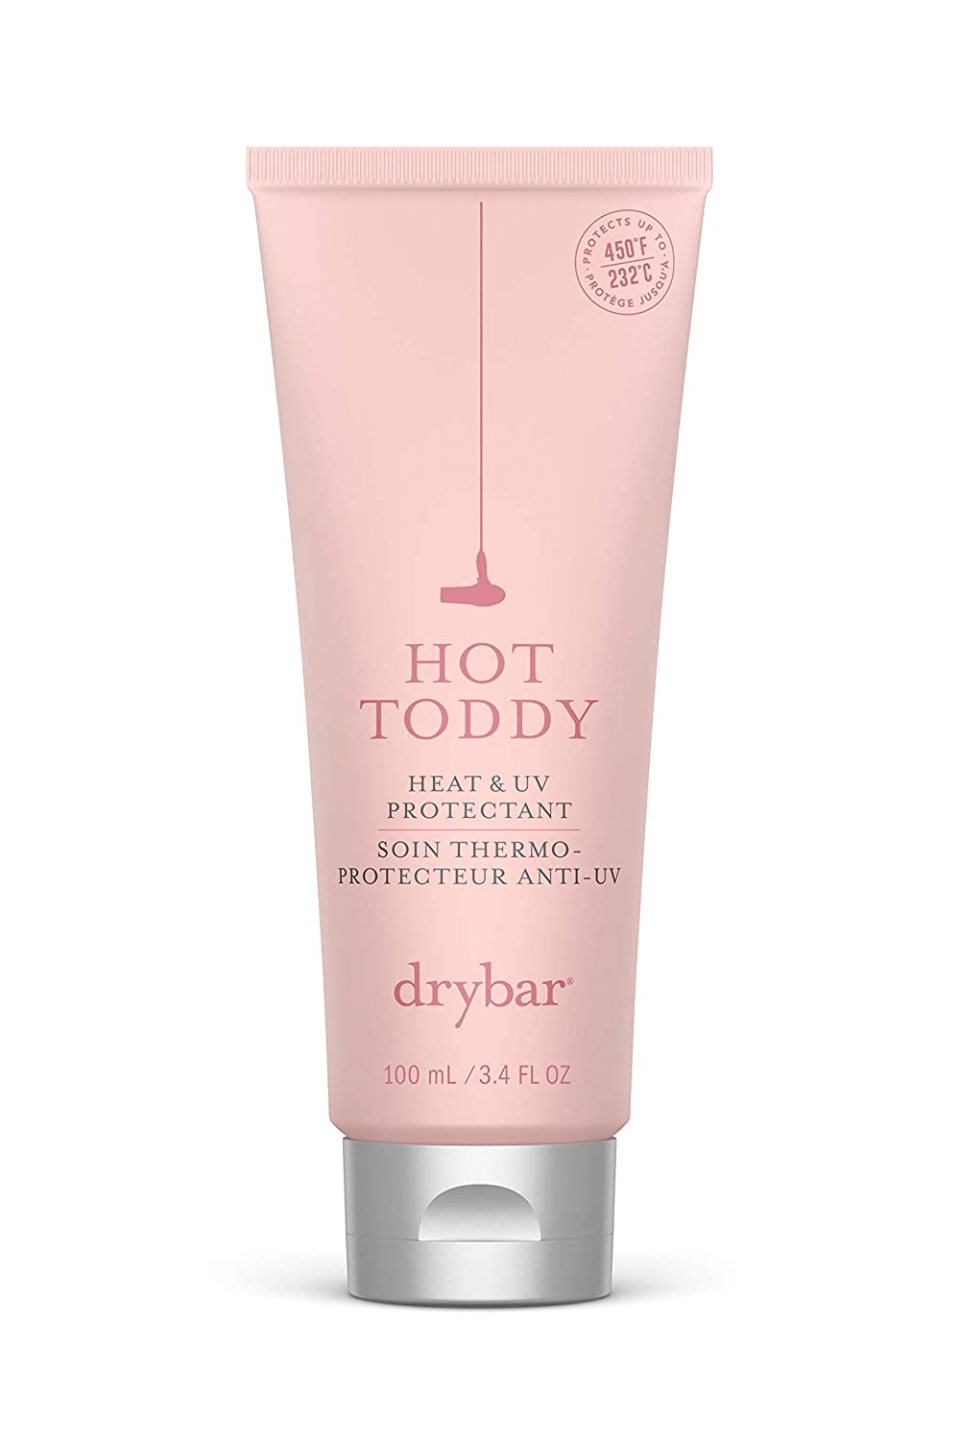 7) Drybar Hot Toddy Heat Protectant Lotion